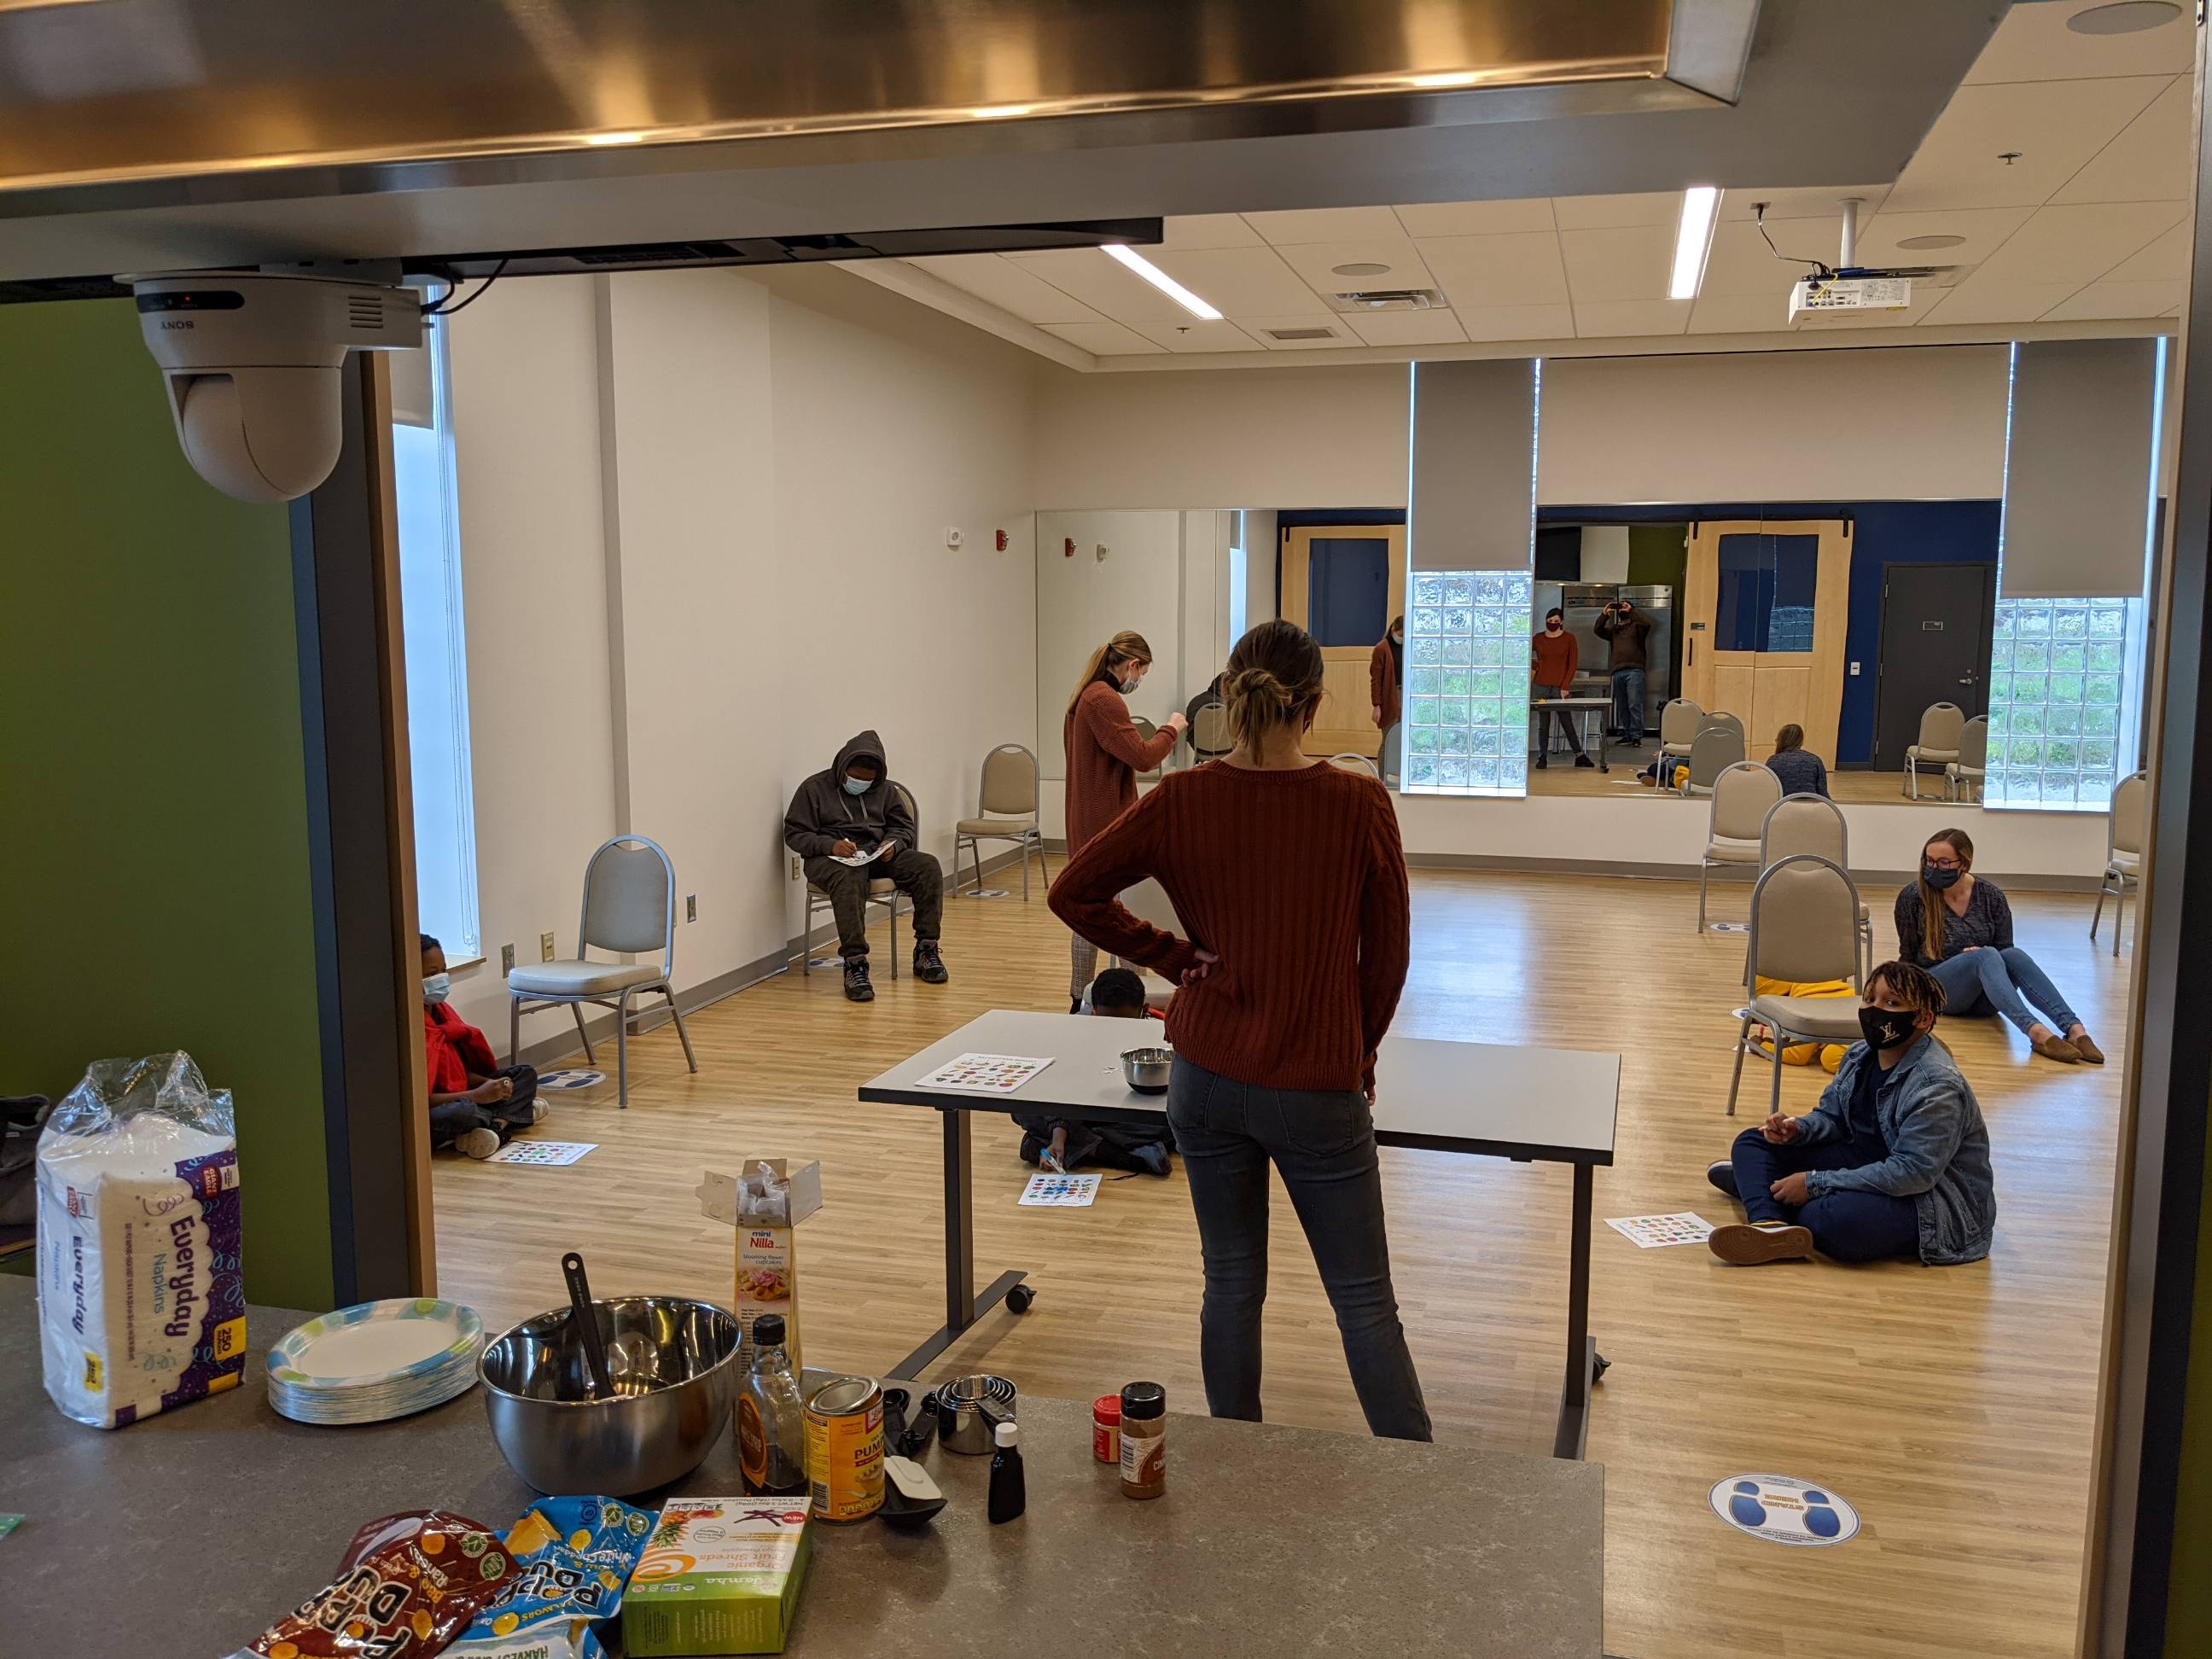 a person is getting ready to do food demo in a room, several individuals sitting around the space